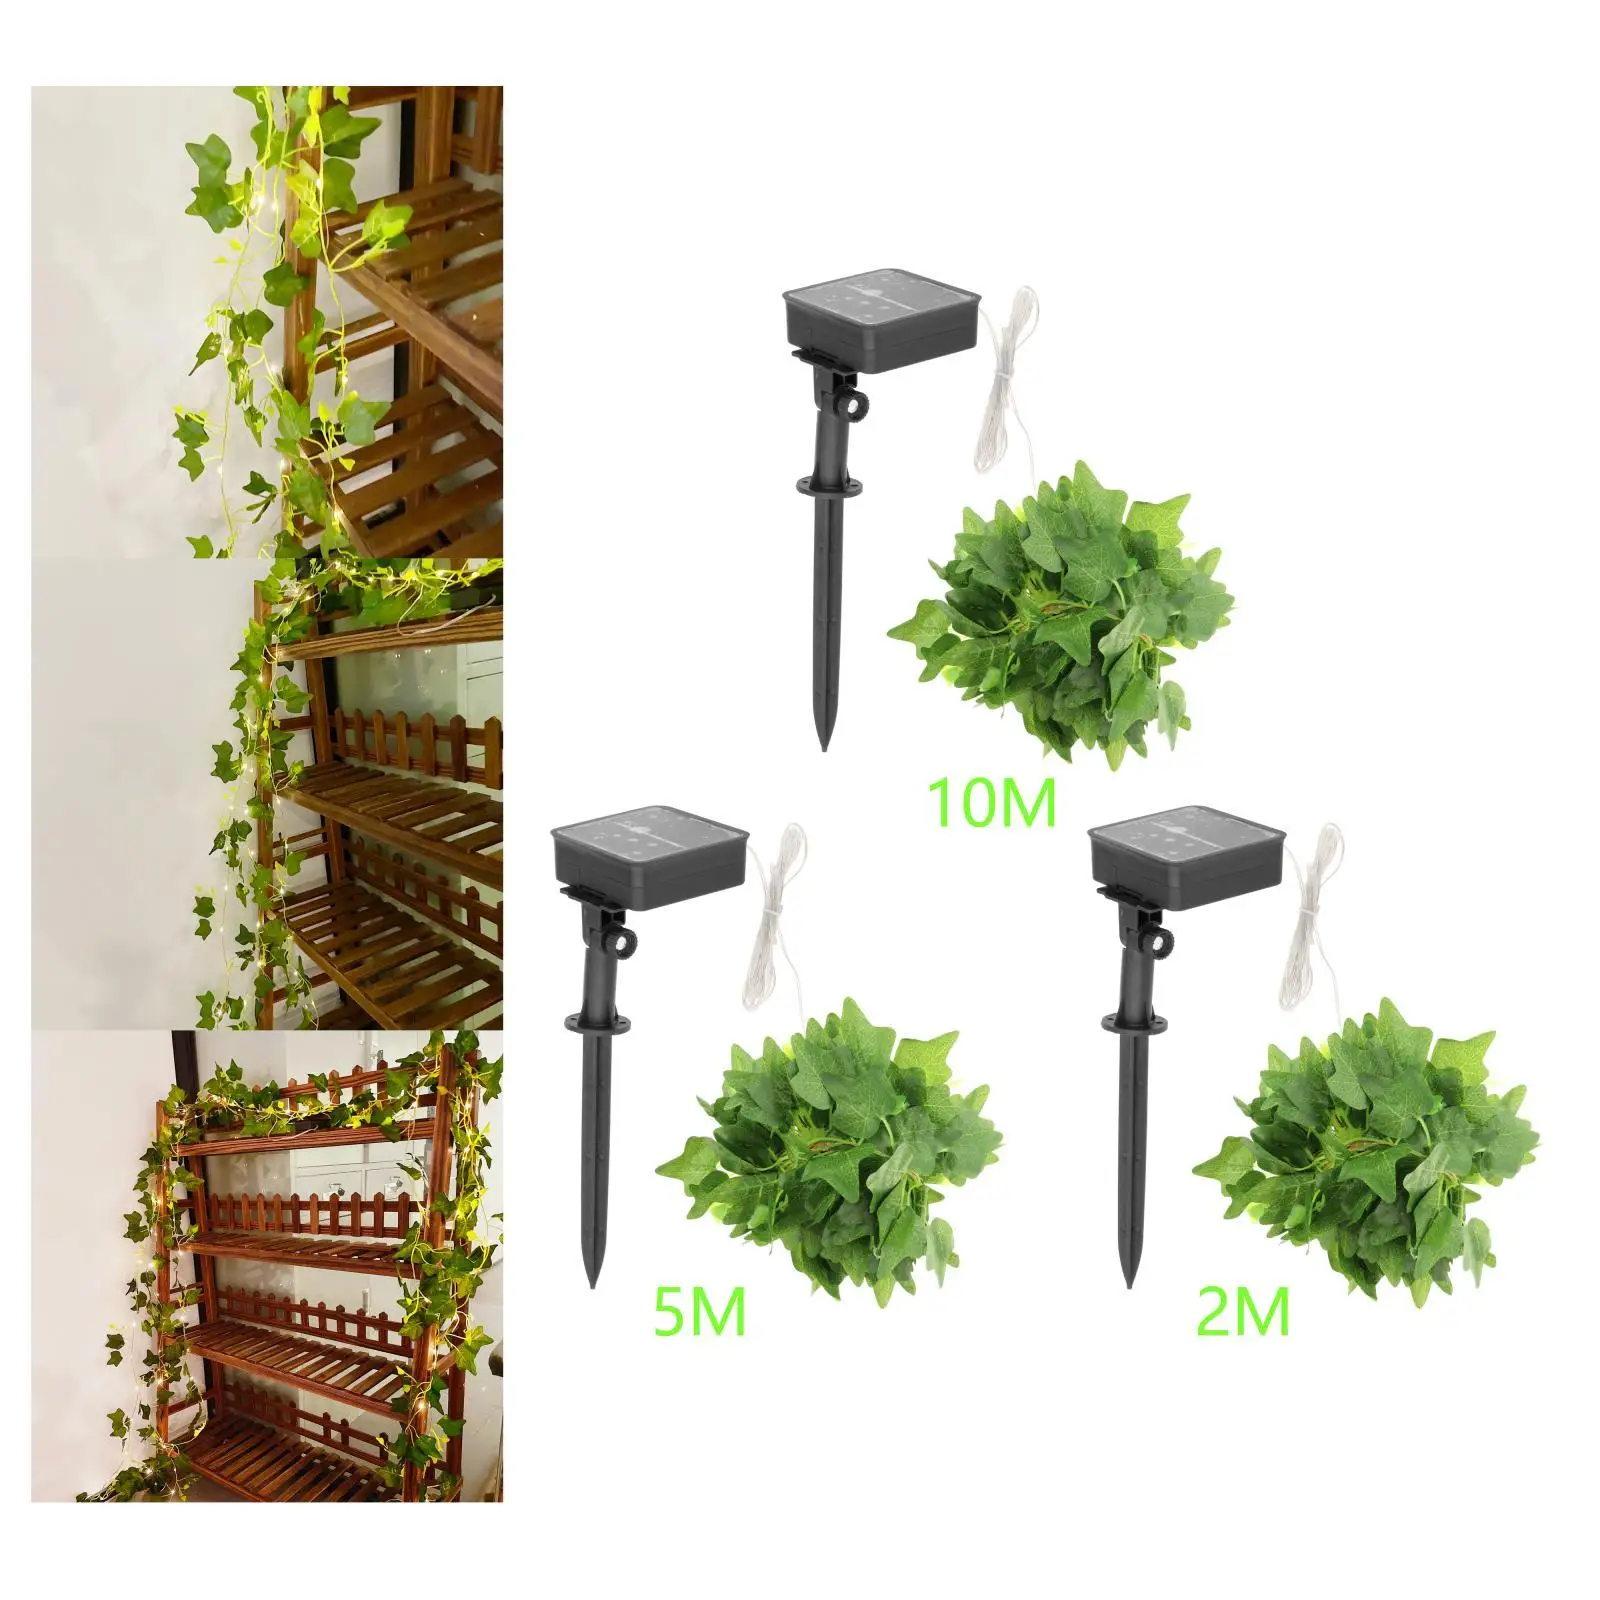 Solar Powered Artificial Plants Lamp Fairy Lights Green Leaf Light for Patio Birtdhay Indoor Festival